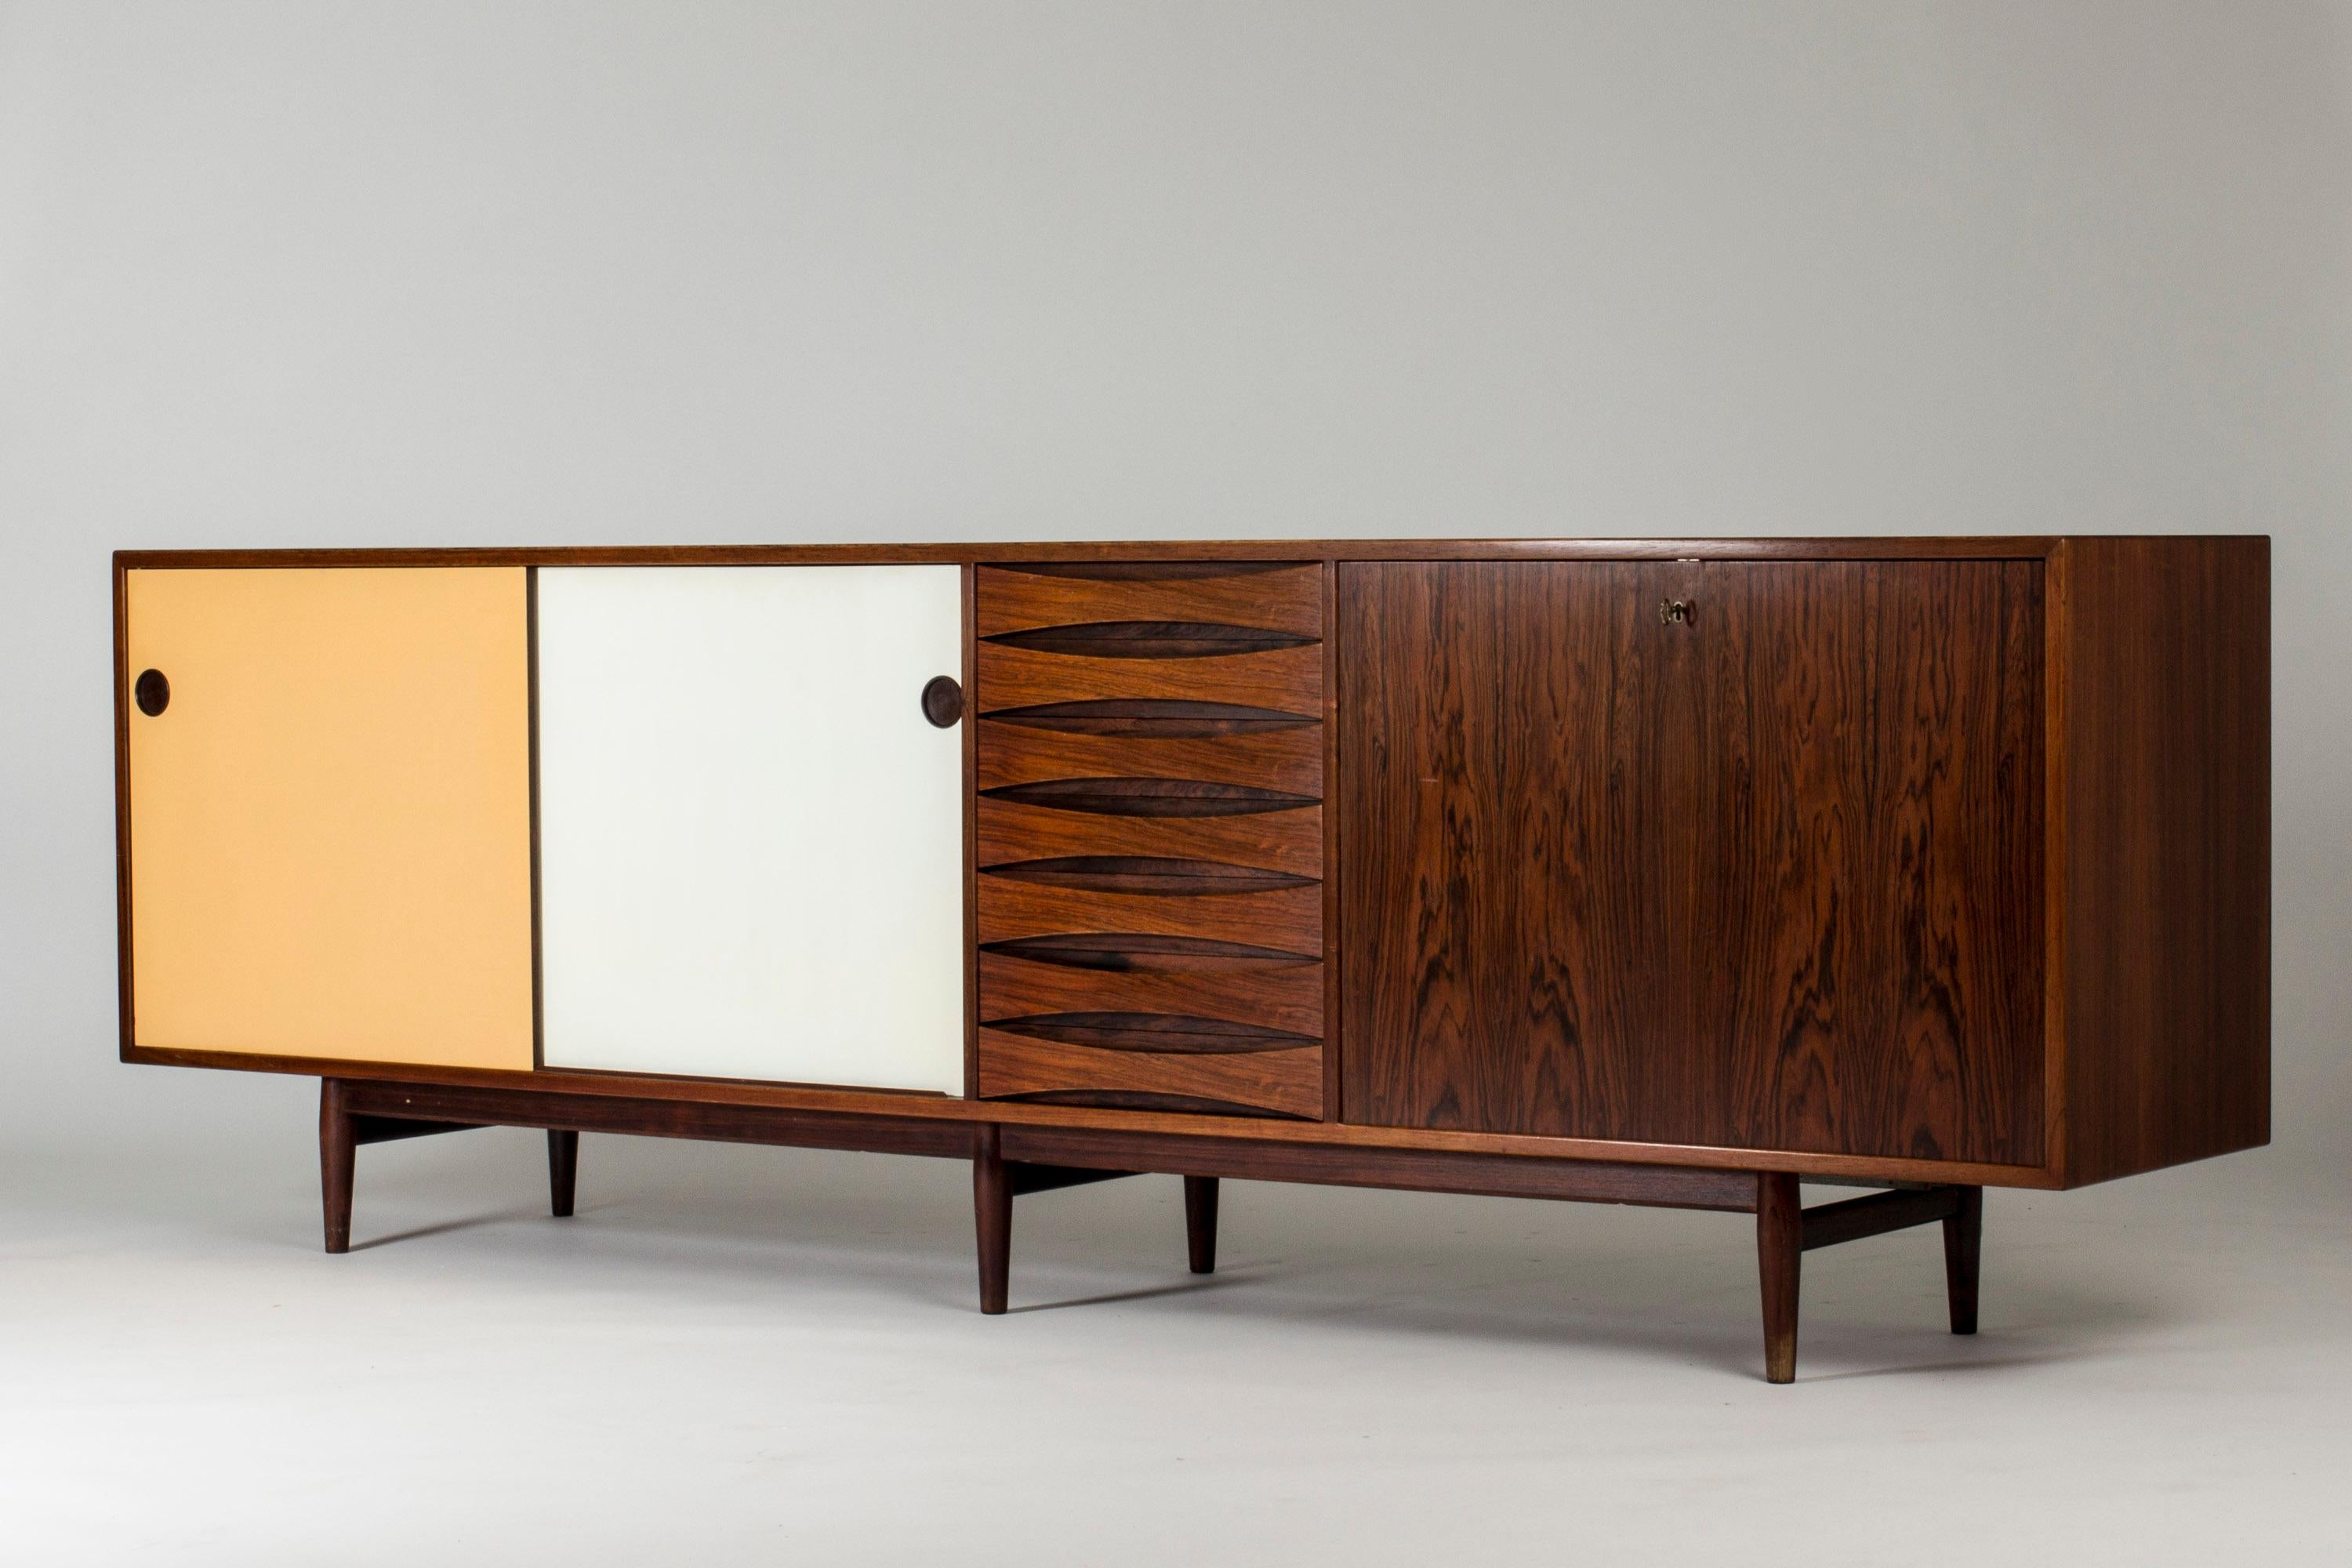 Striking rosewood sideboard by Arne Vodder, where yellow and white panel doors contrast with the cleanly sculpted drawers in the middle and the flaming rosewood veneer on the flap door on the left. The back of the sideboard is made with rosewood